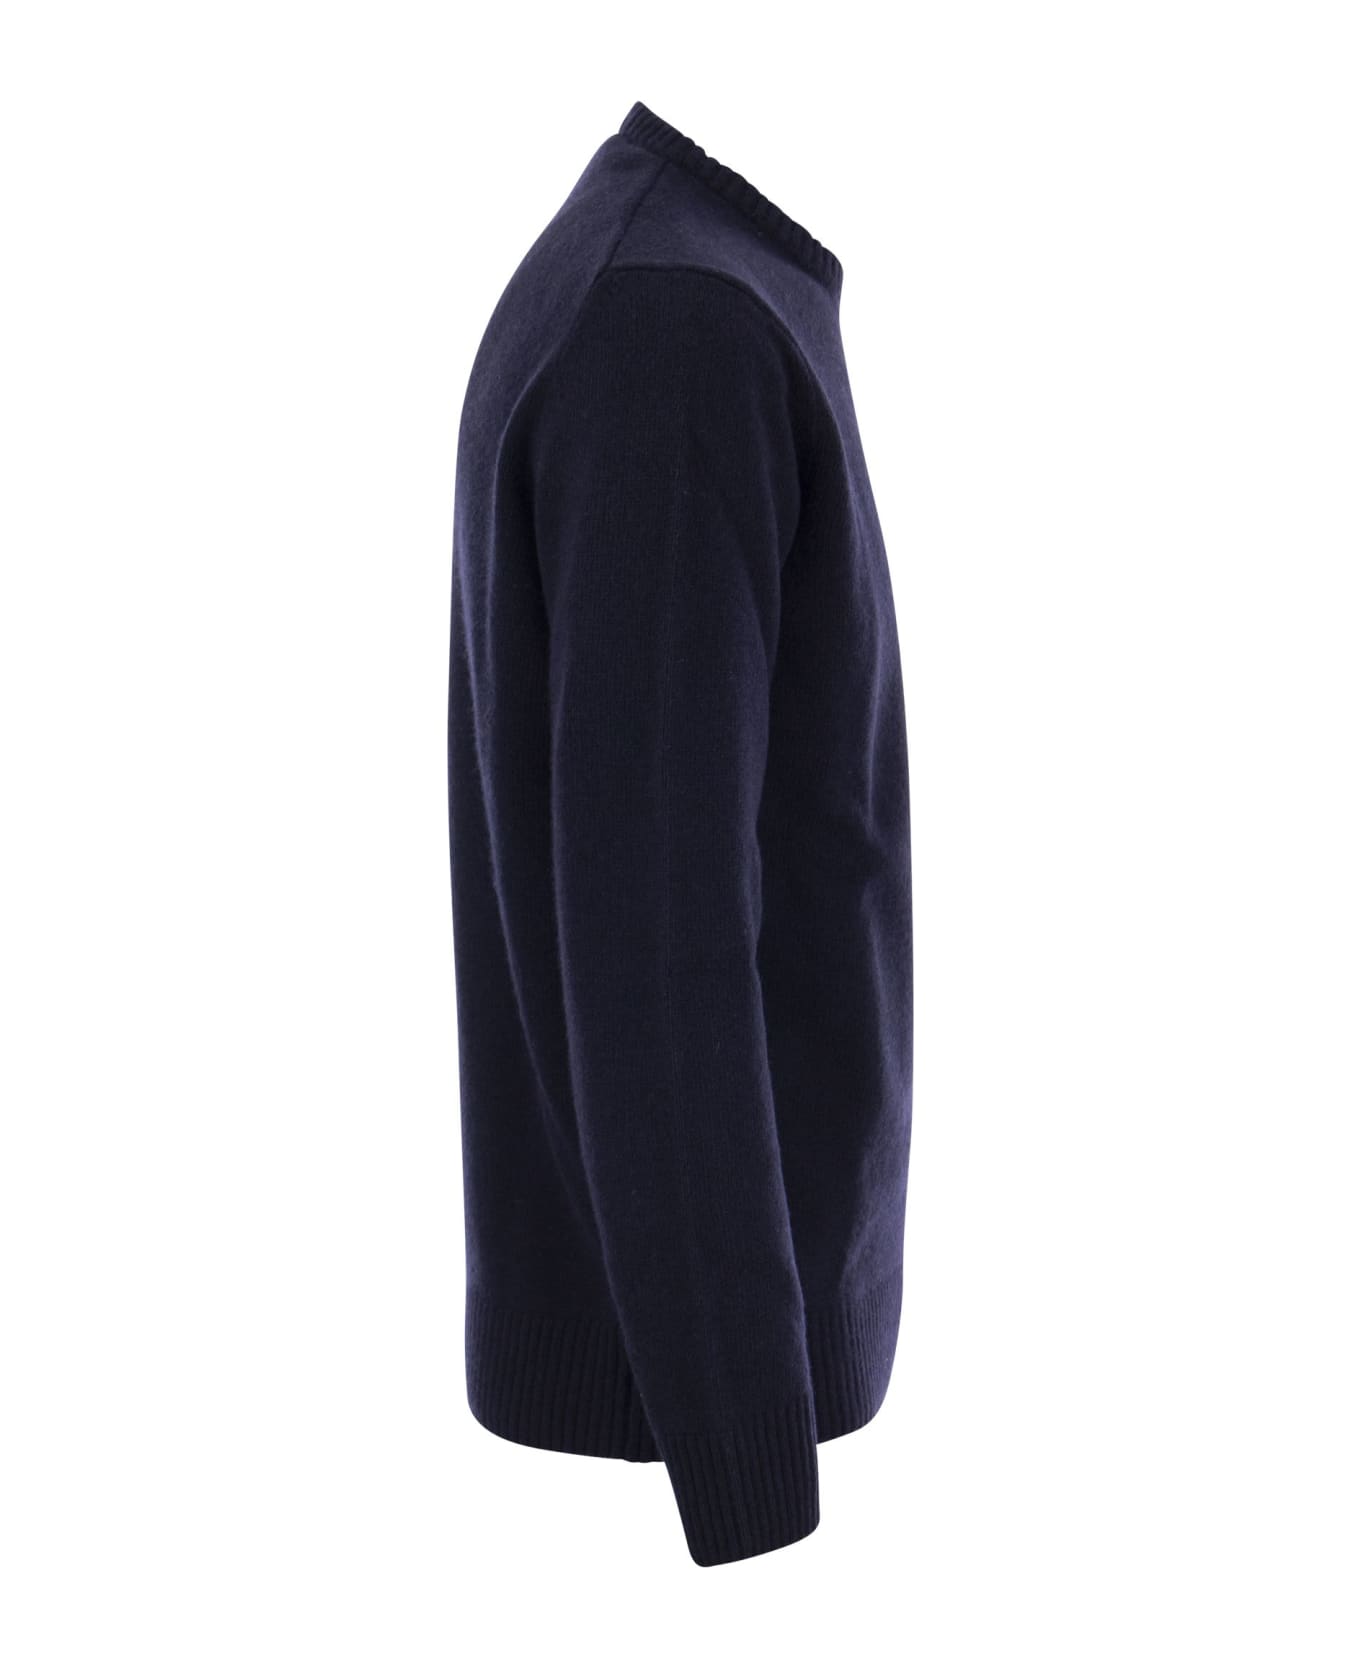 Paul&Shark Wool Crew Neck With Arm Patch Sweater - BLU SCURO ニットウェア